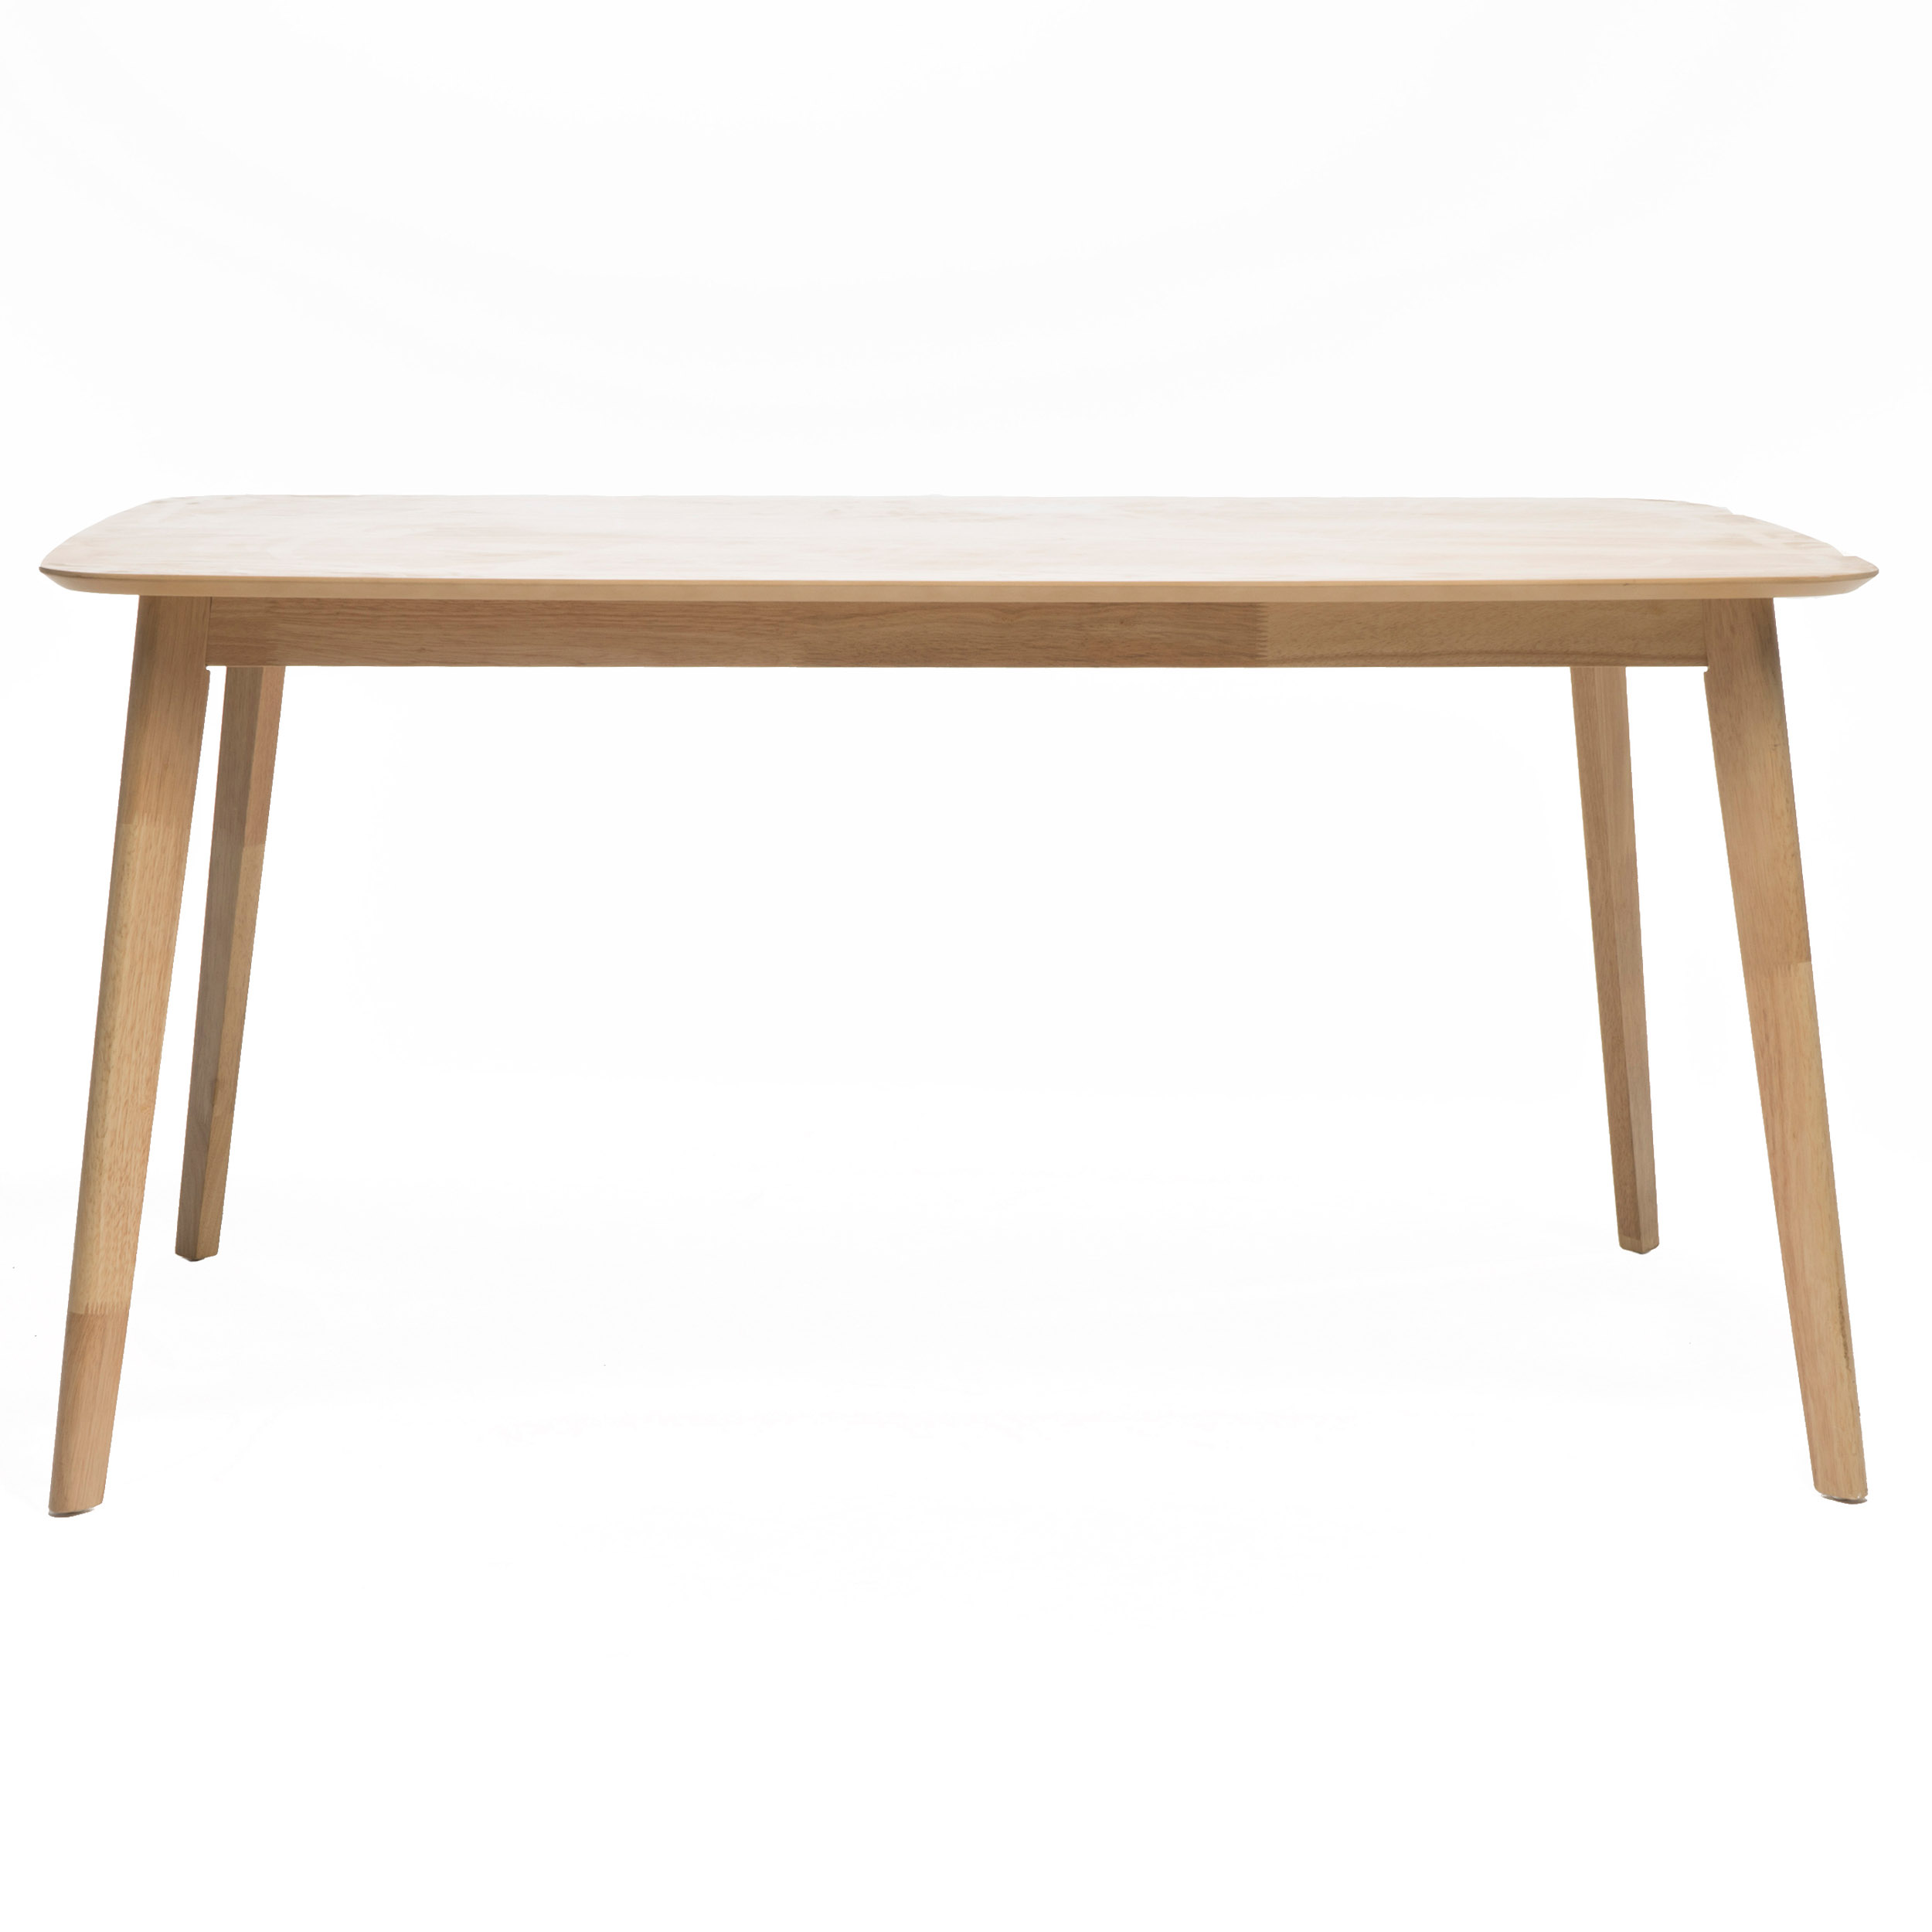 Noble House Layla Indoor Natural Oak Finish Wood Dining Table - image 2 of 7